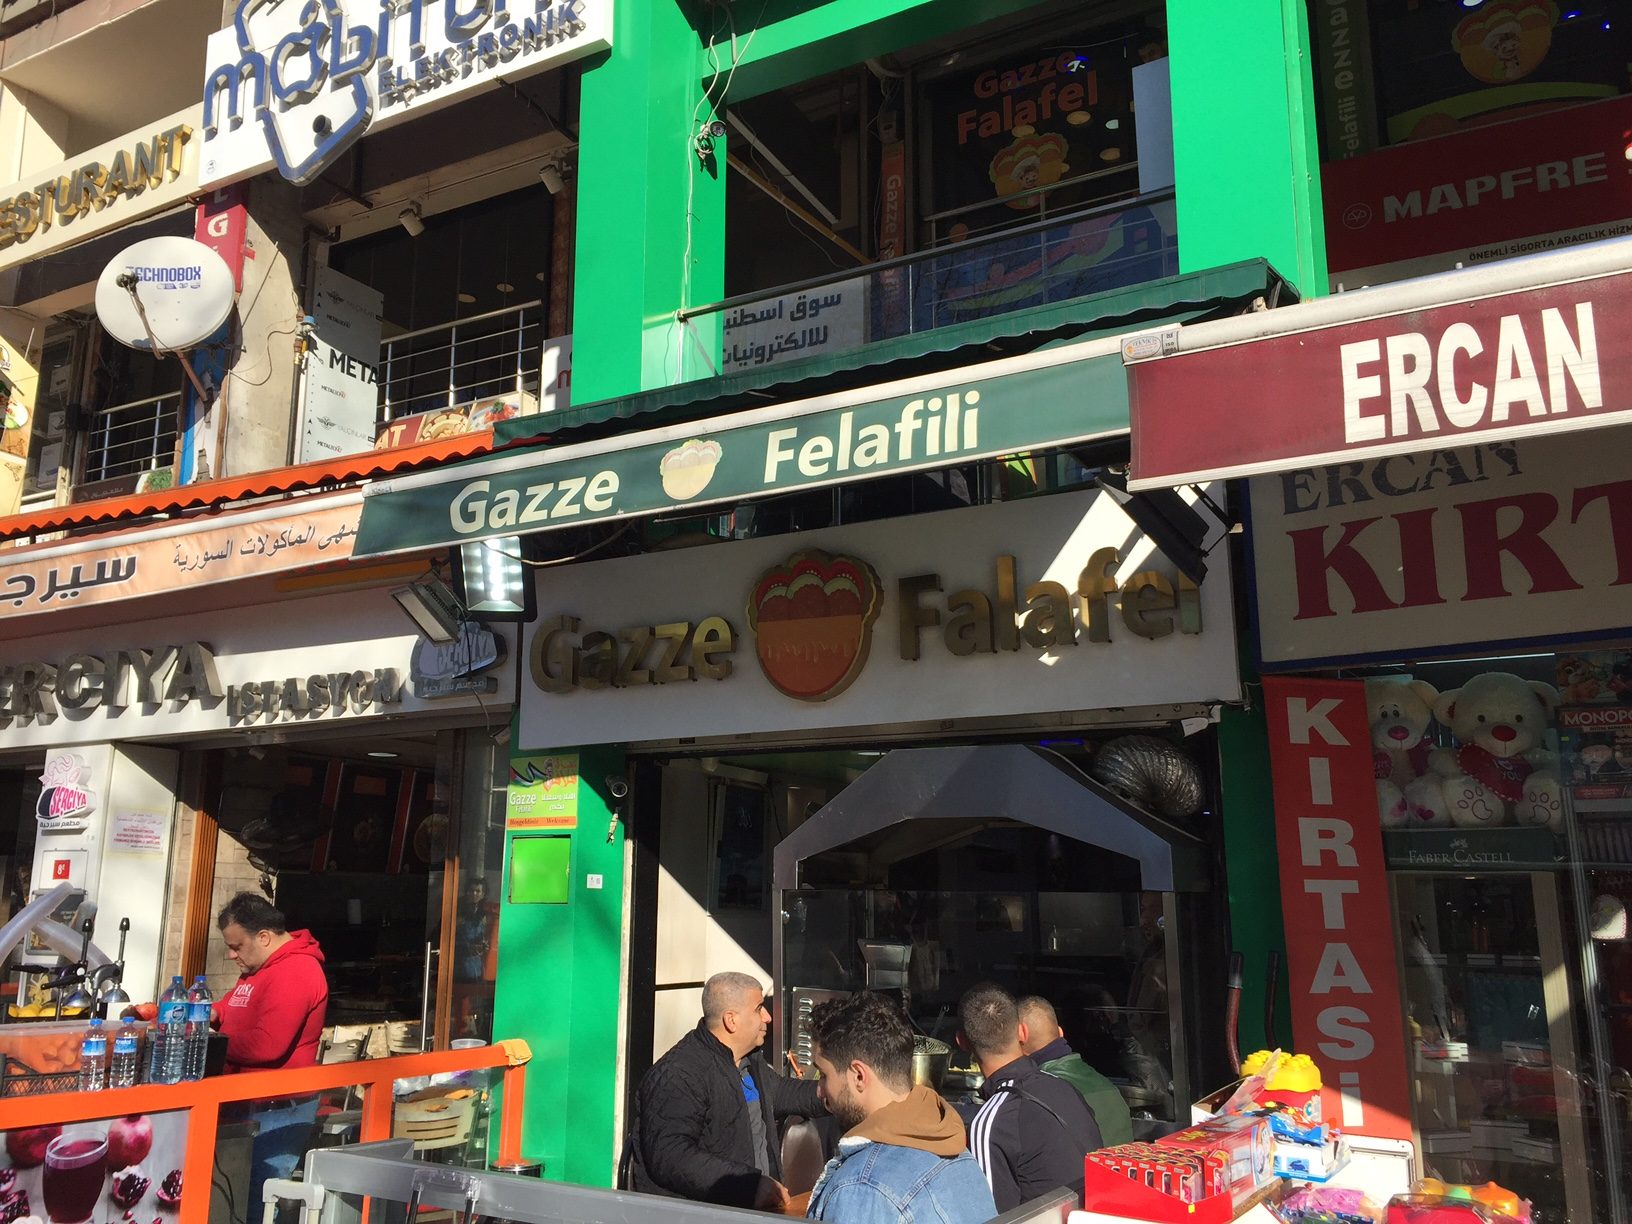 Migrant restaurants in the Fatih district of the city of Istanbul. Photo: Aslı Süberker, 2019.